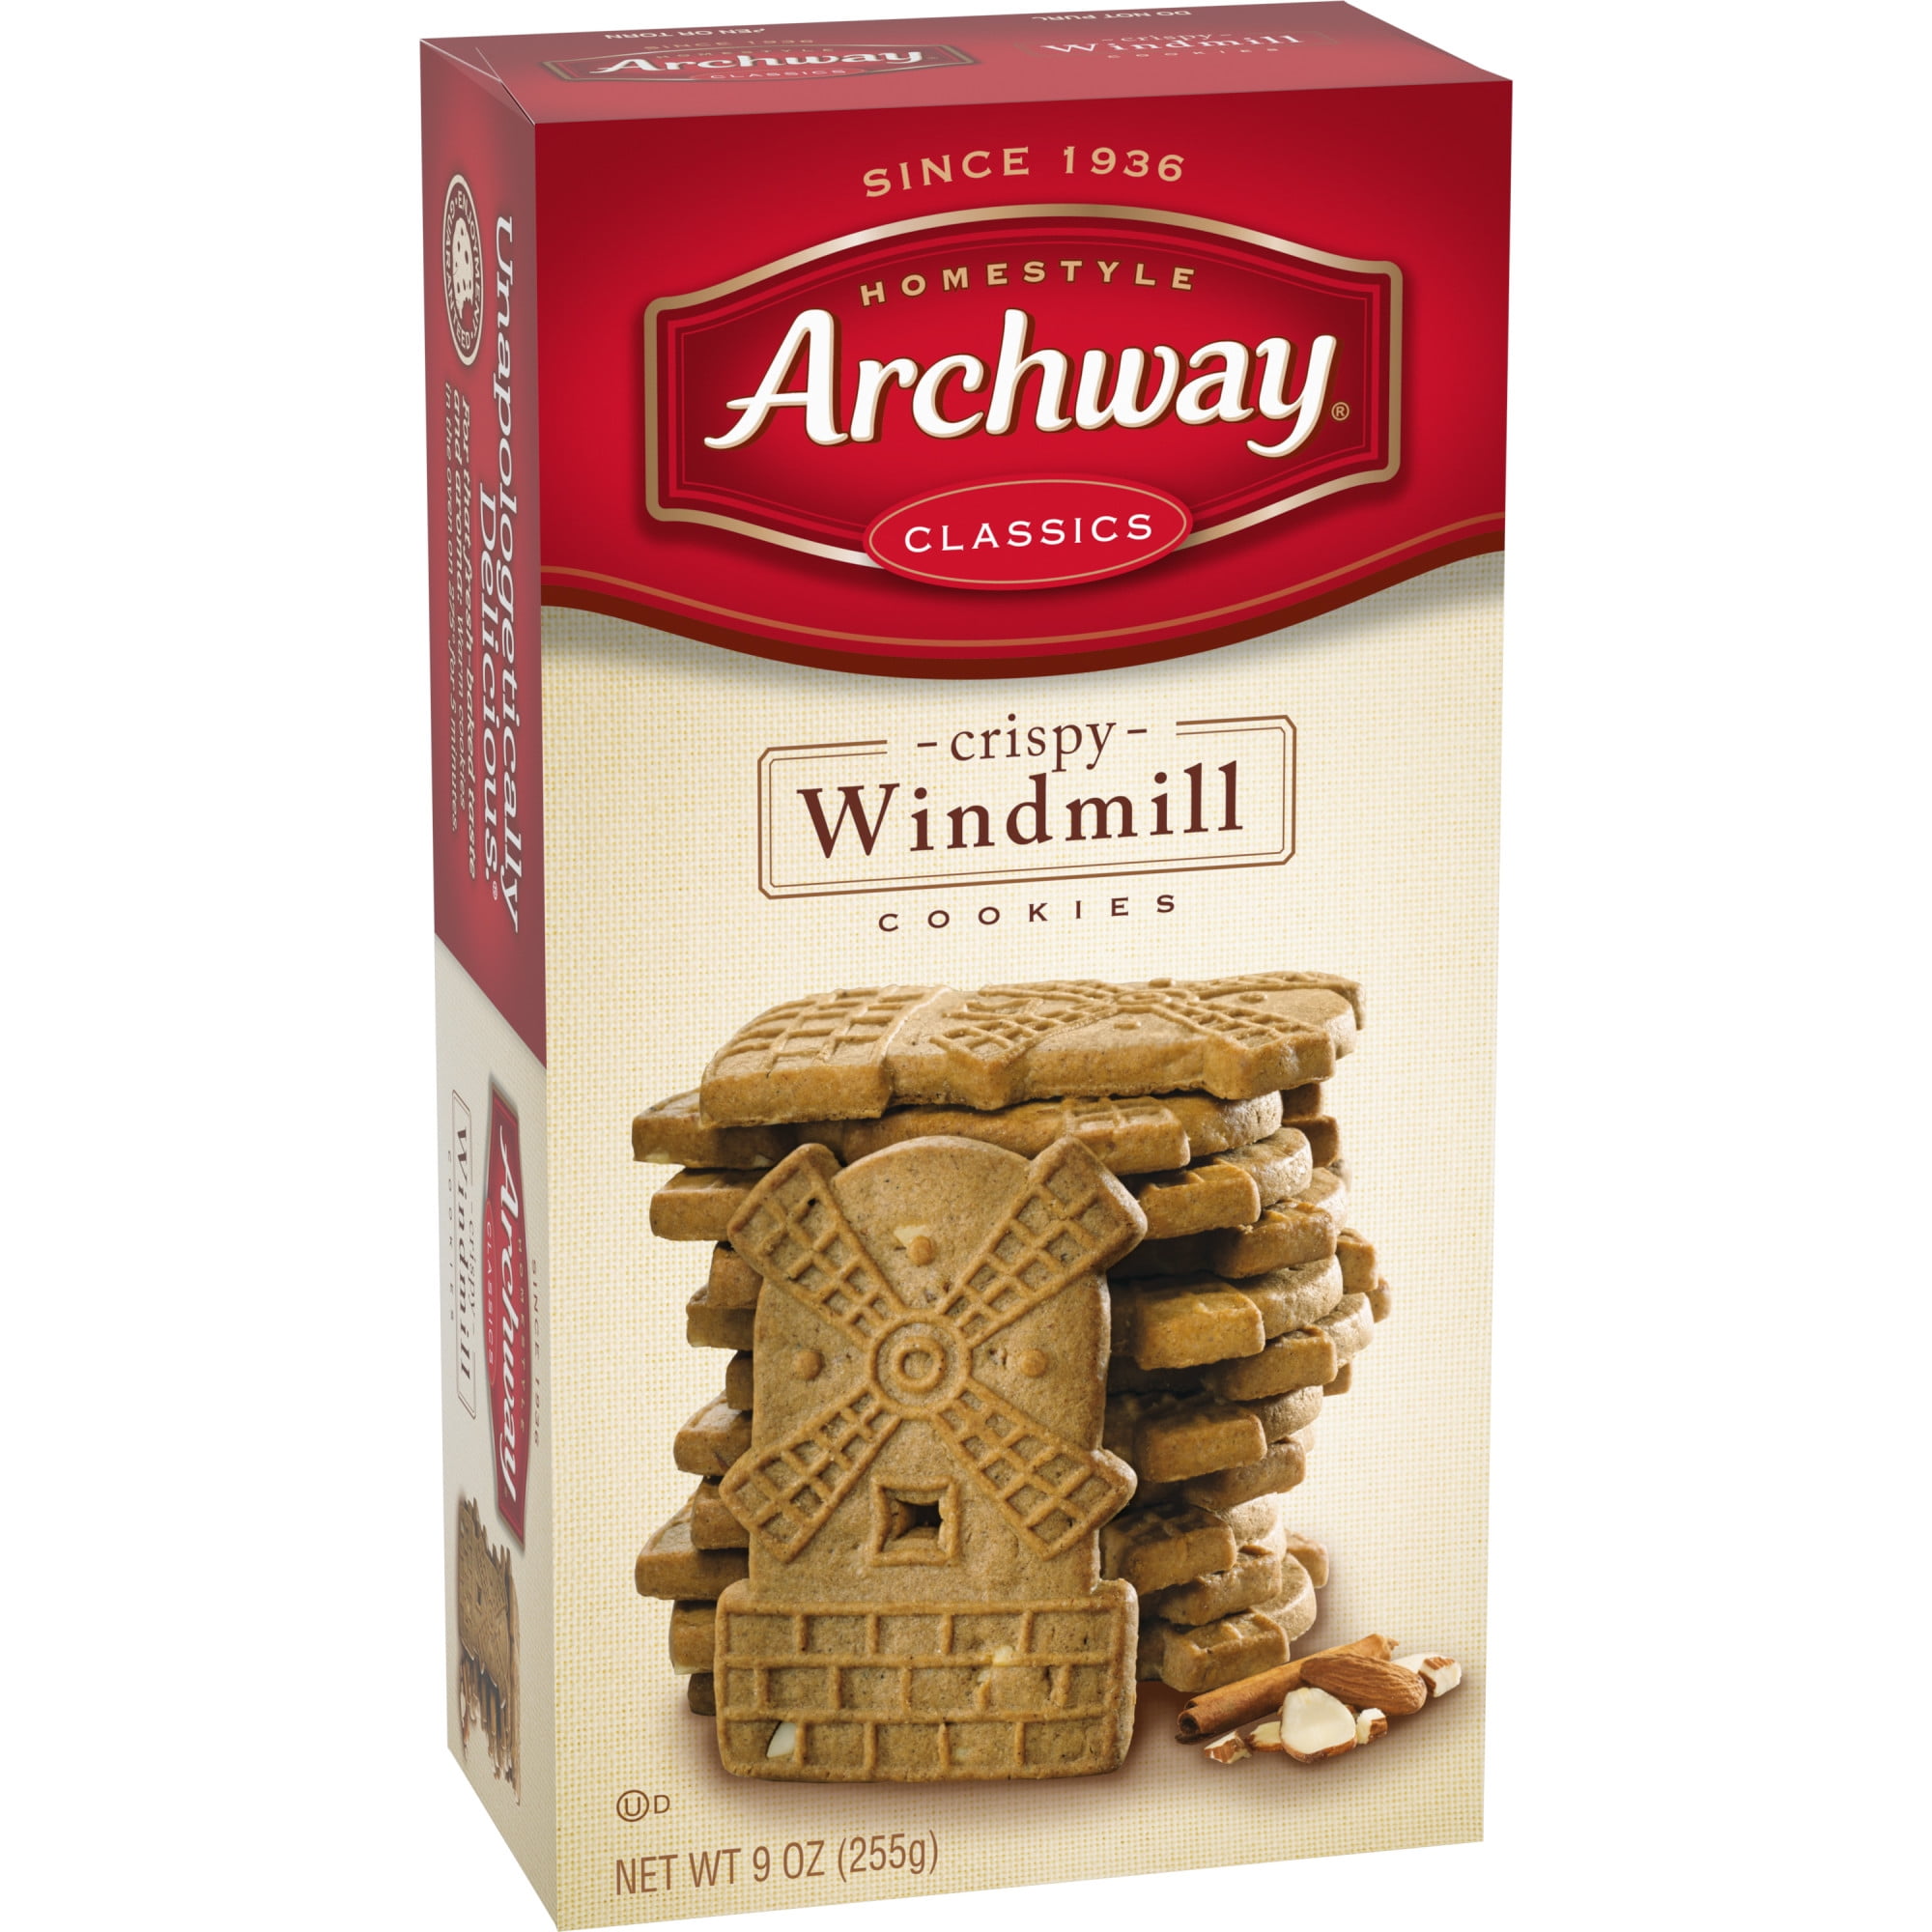 Discontinued Archway Christmas Cookies - Does Anyone Know Of This Cookie Fr...